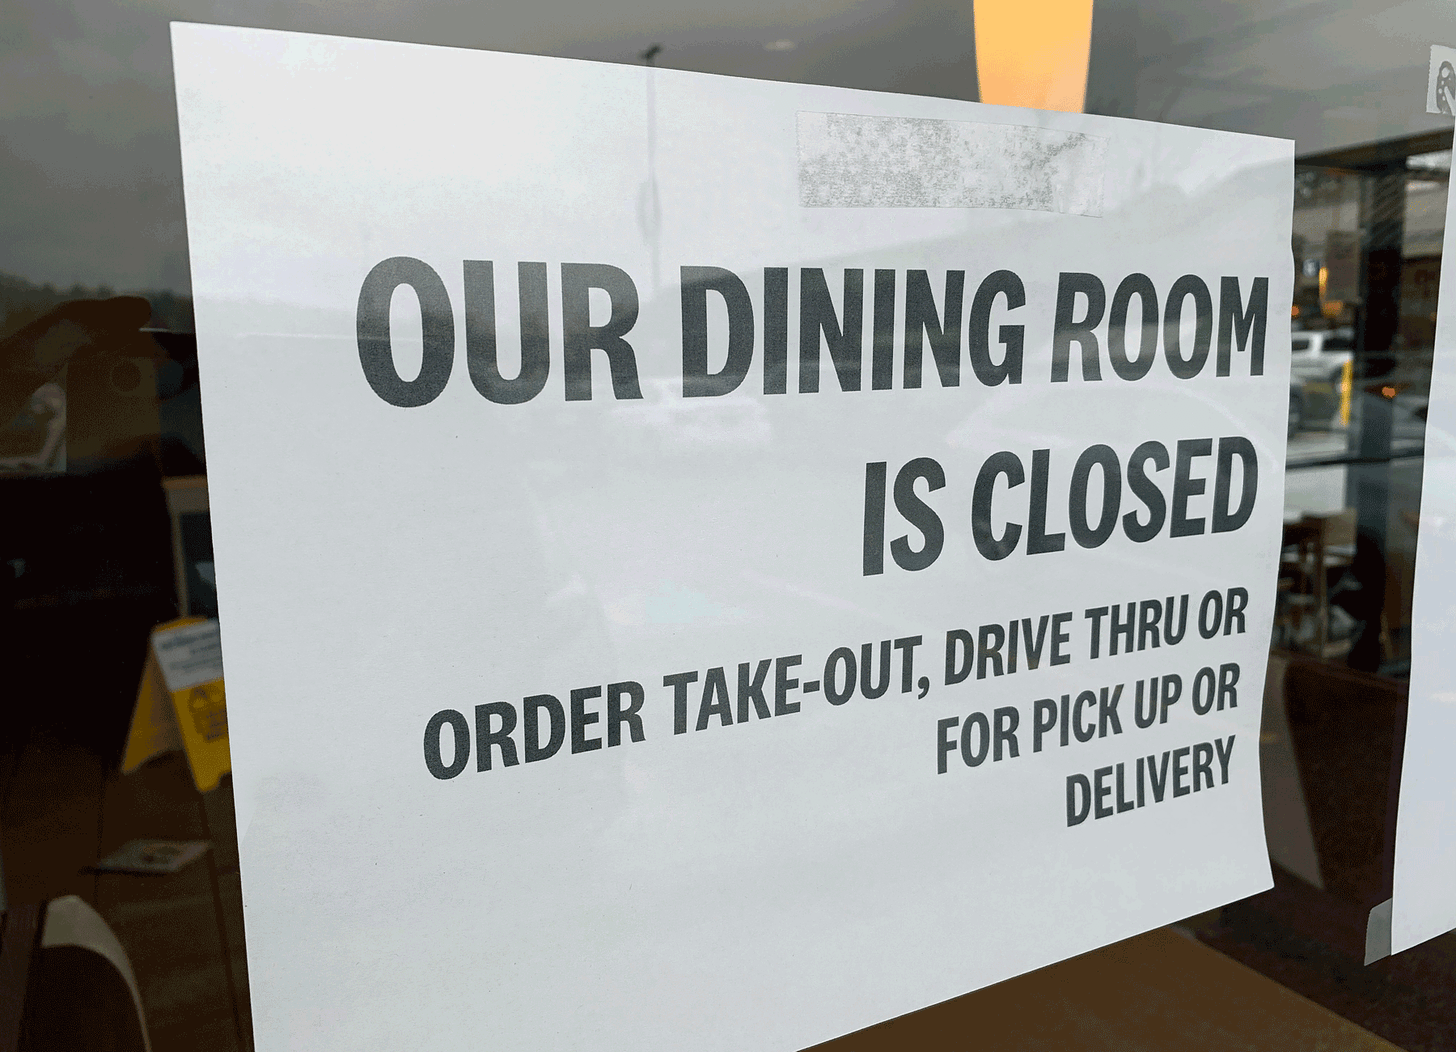 Washington to shut restaurant dining rooms, Michigan expected to follow